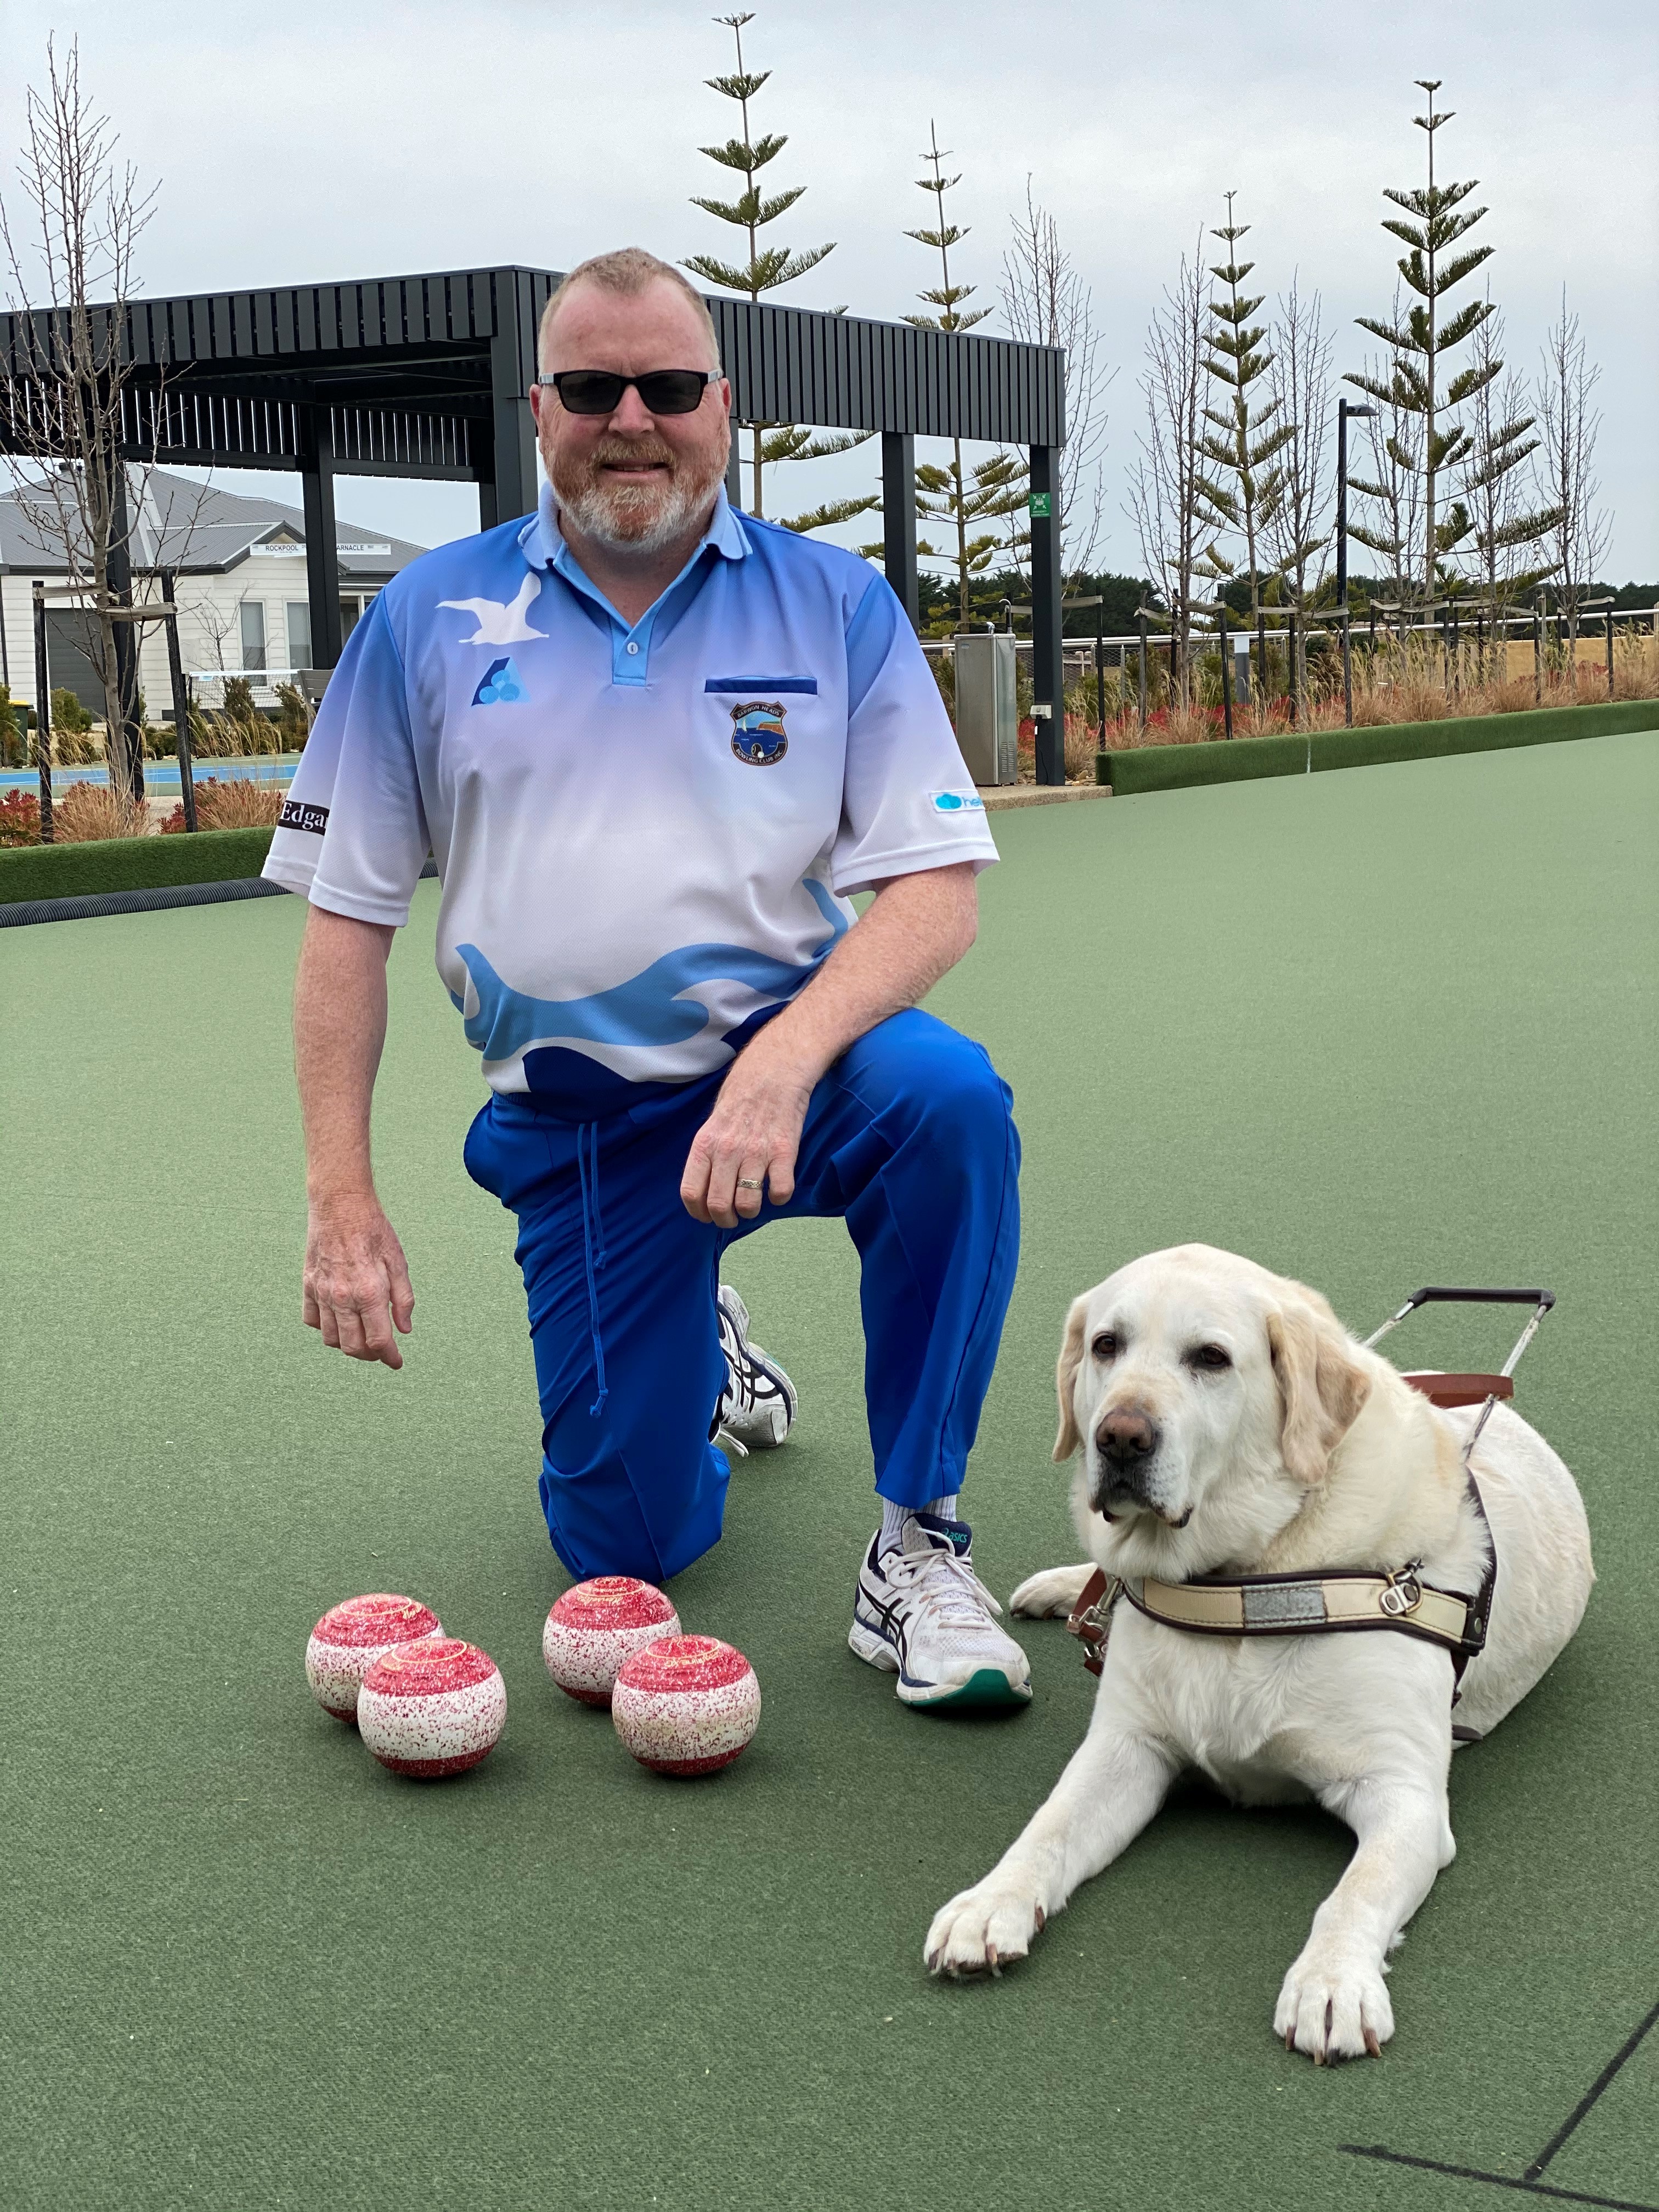 Greg Kennedy crouching with his dog guide Indrik on a Lawn Bowls court